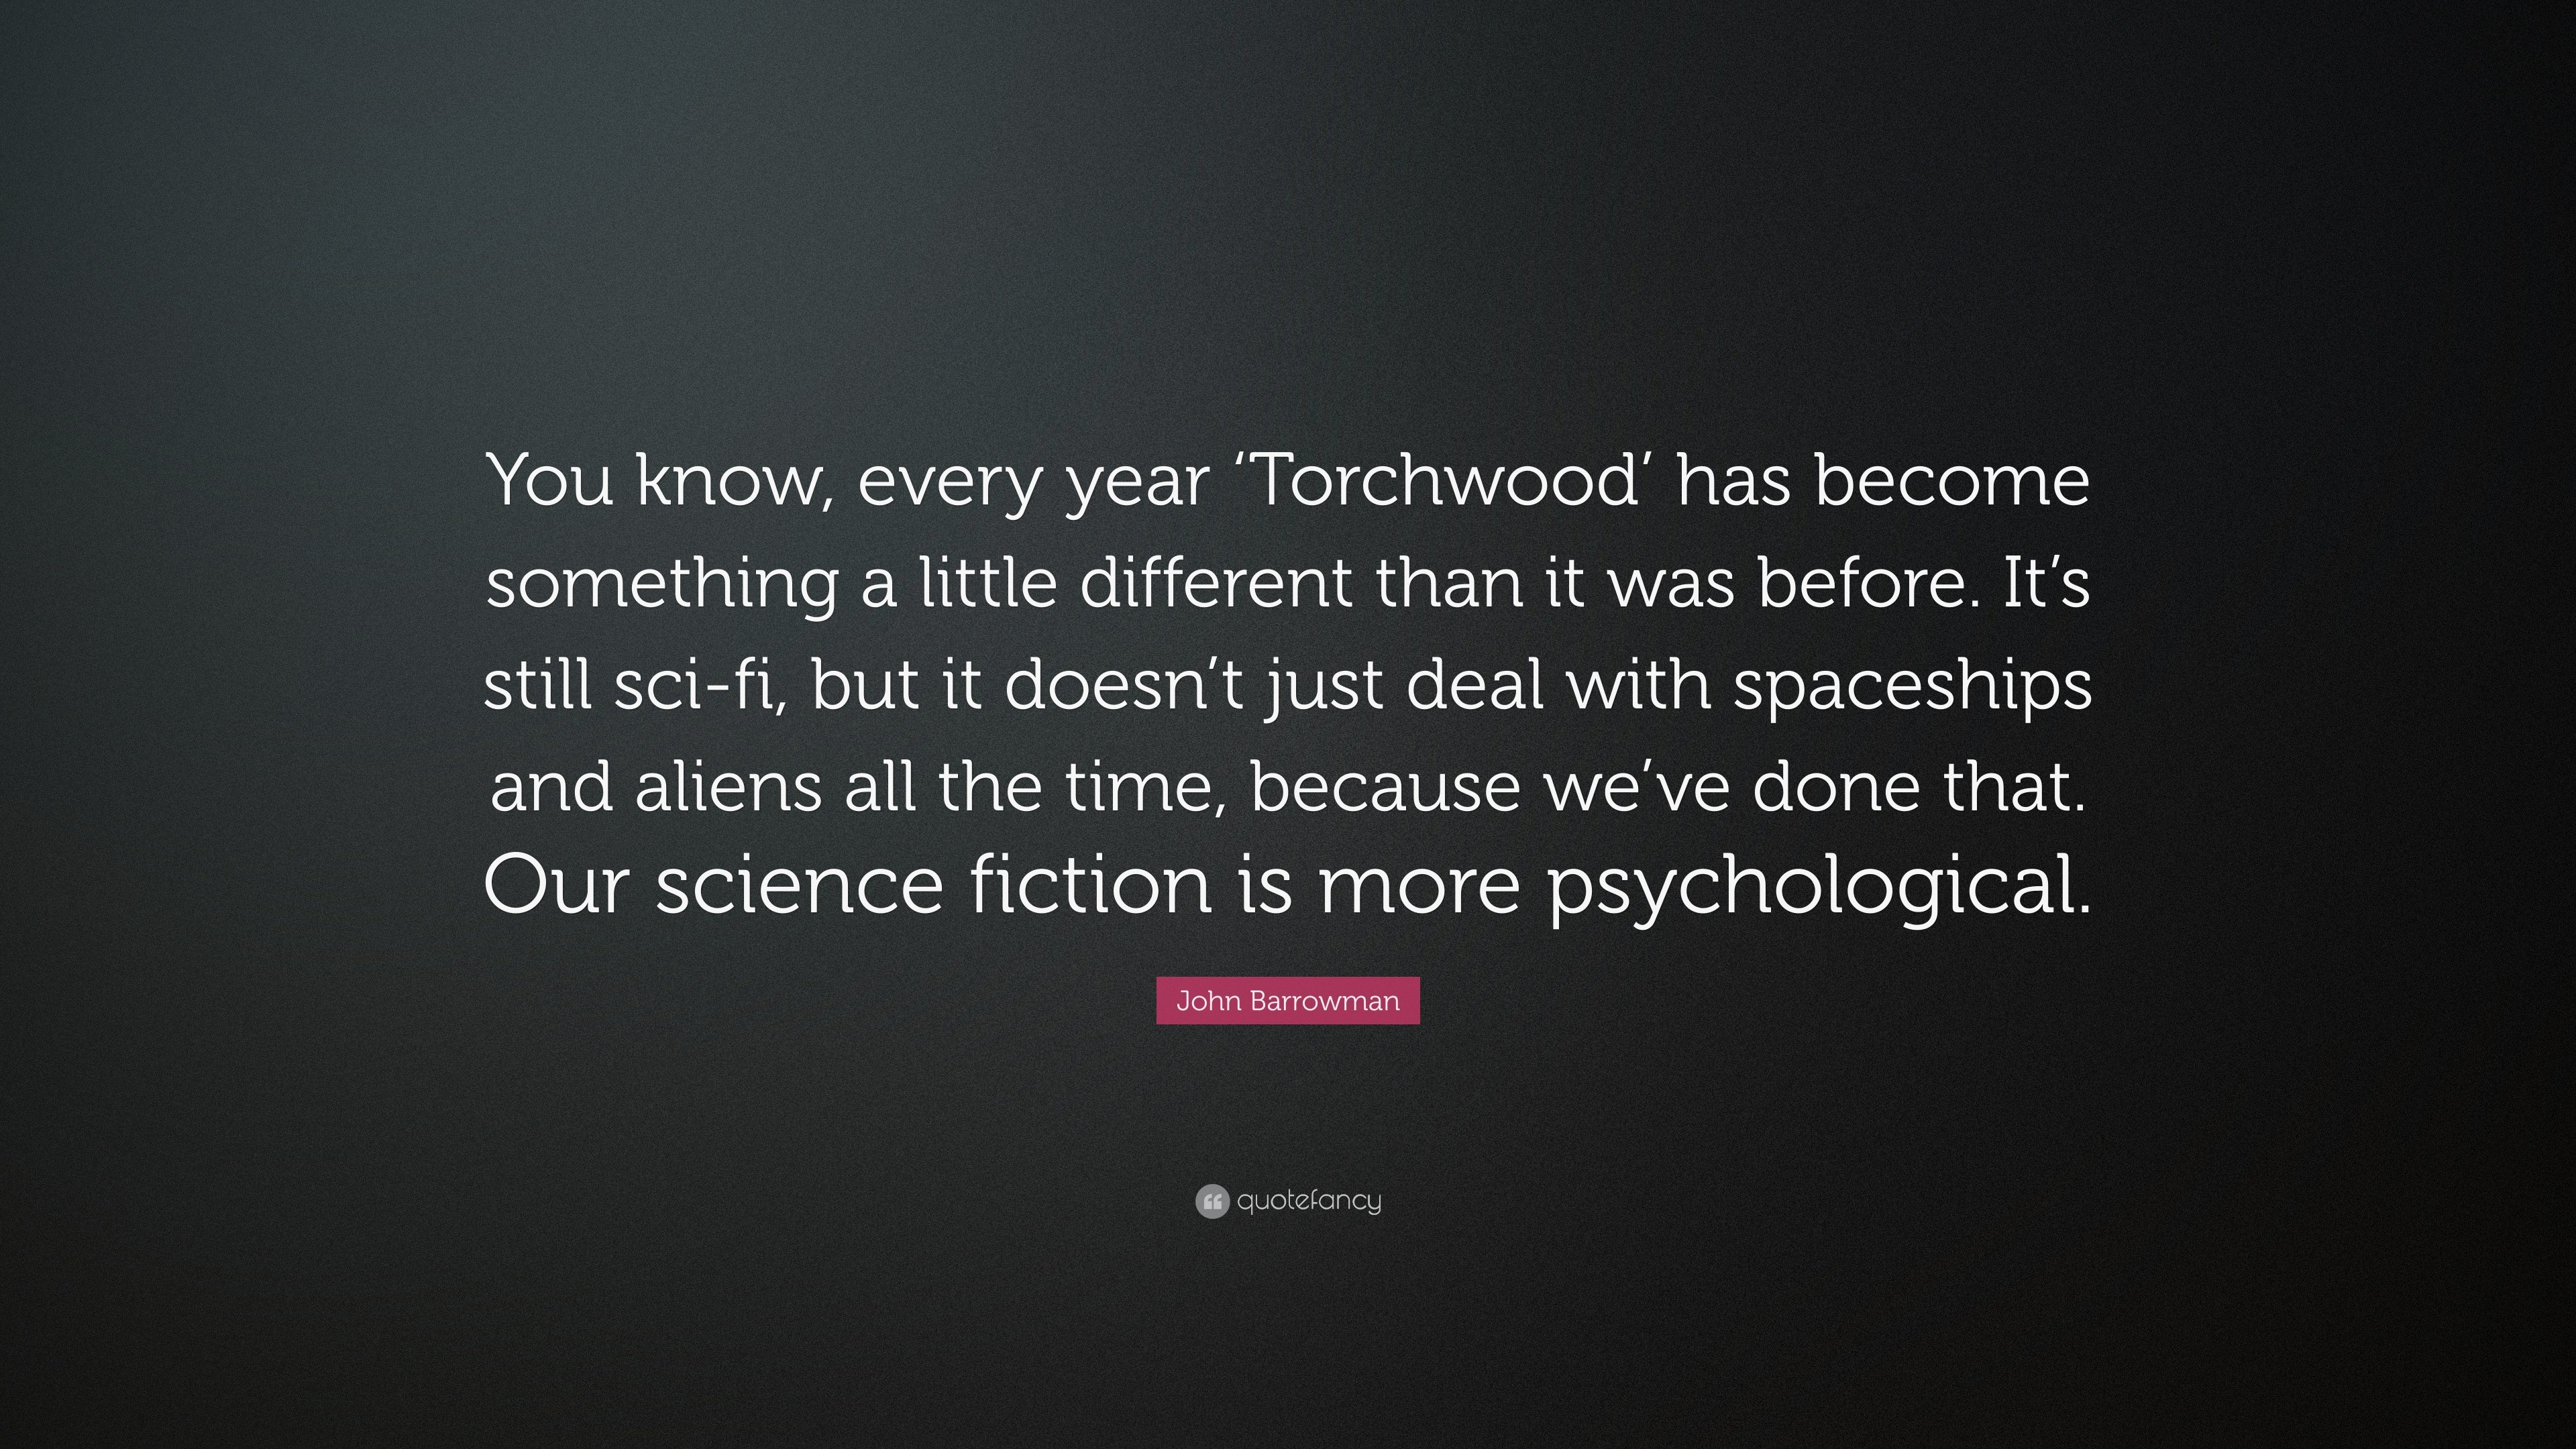 3840x2160 John Barrowman Quote: “You know, every year 'Torchwood' has become something